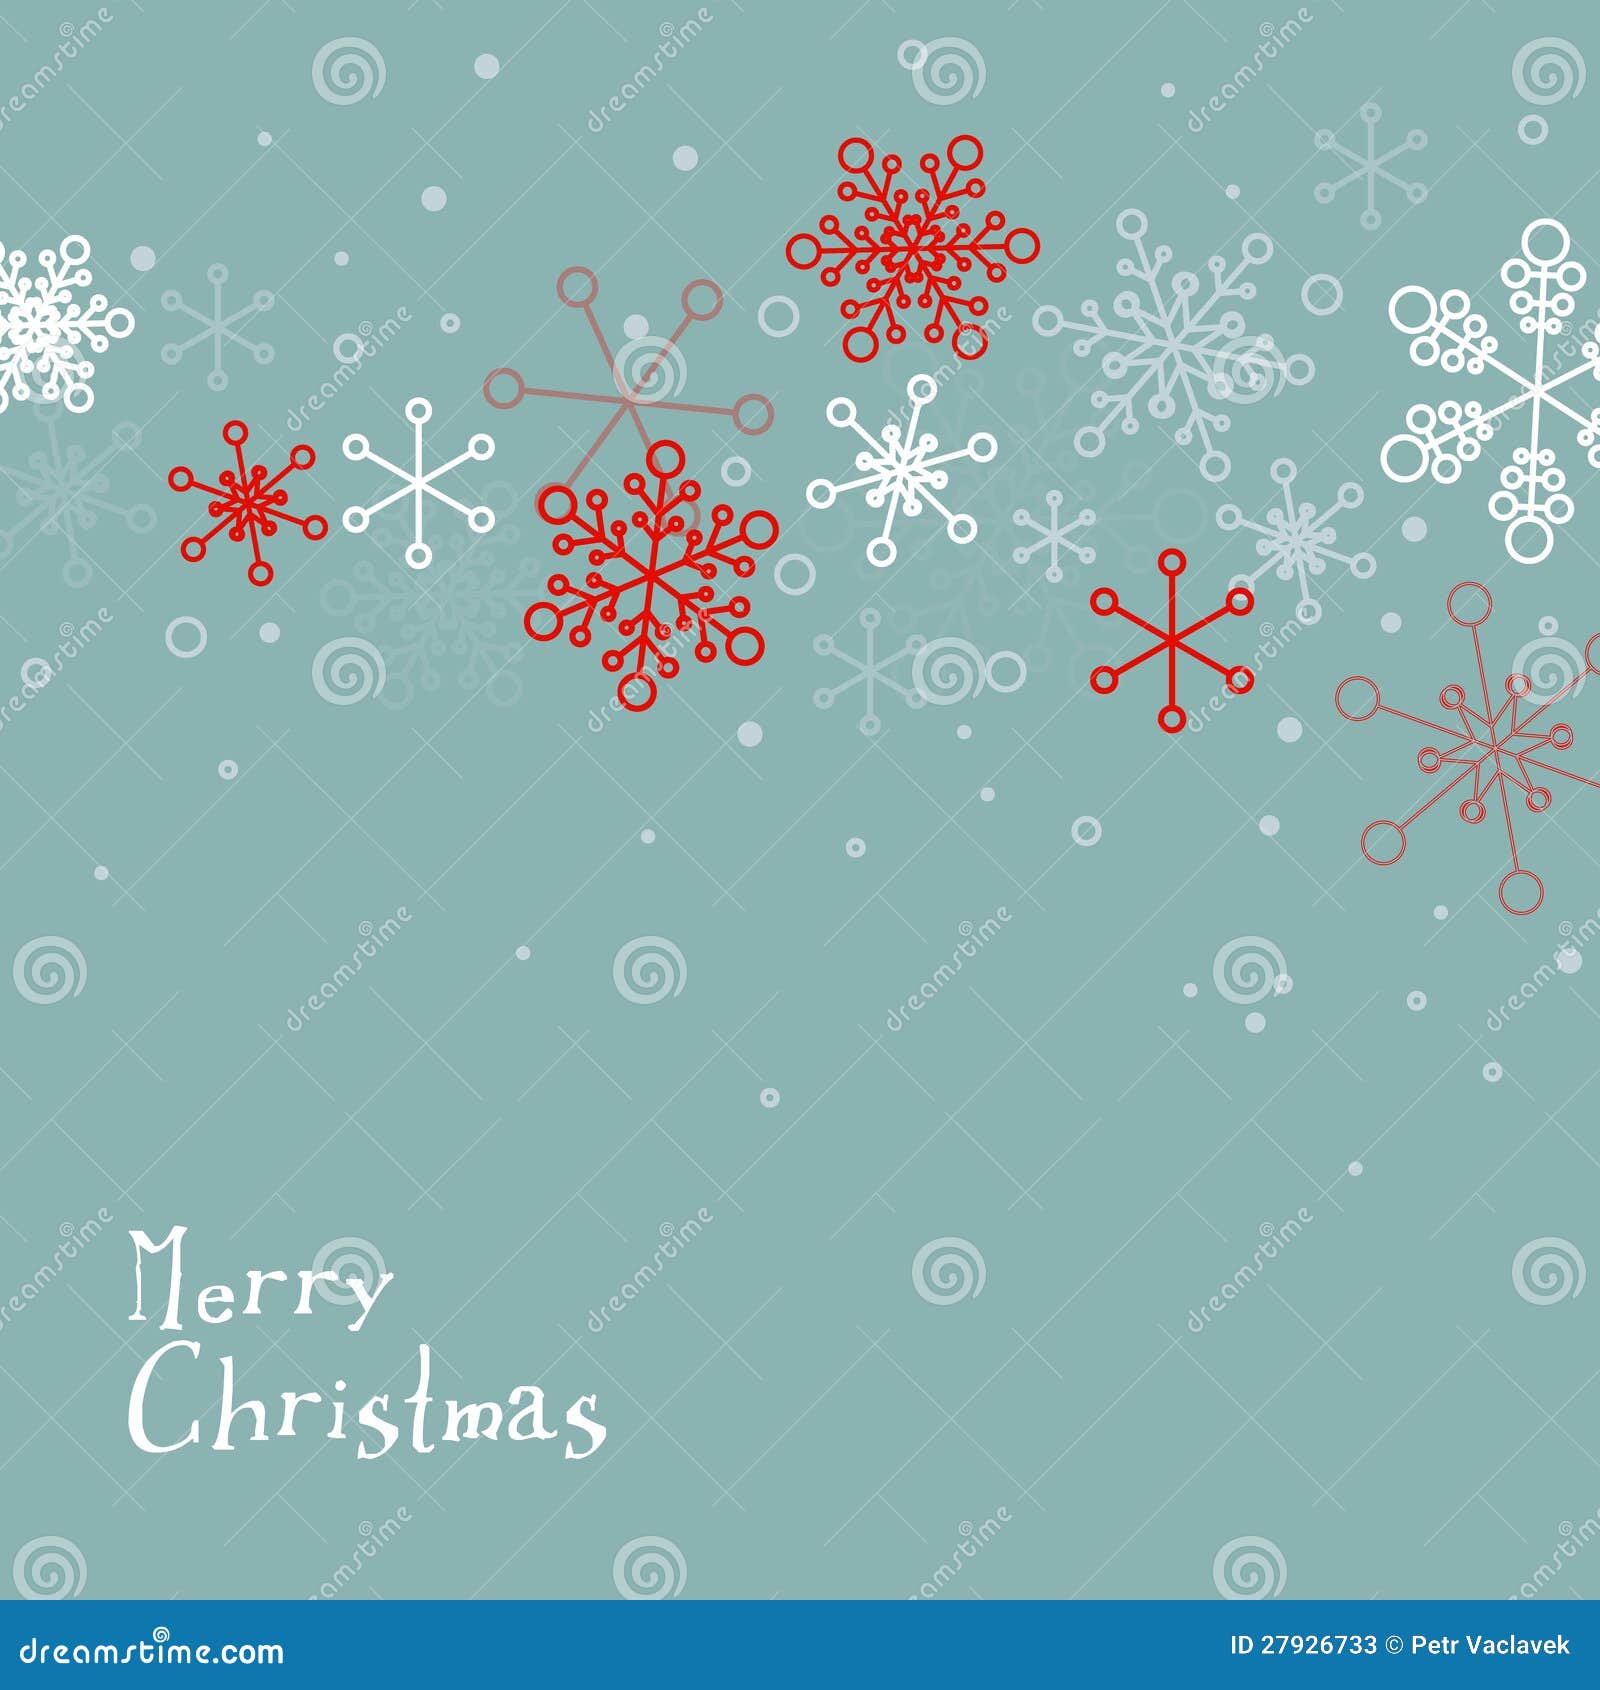 Retro Simple Christmas Card with Snowflakes Stock Vector - Illustration ...